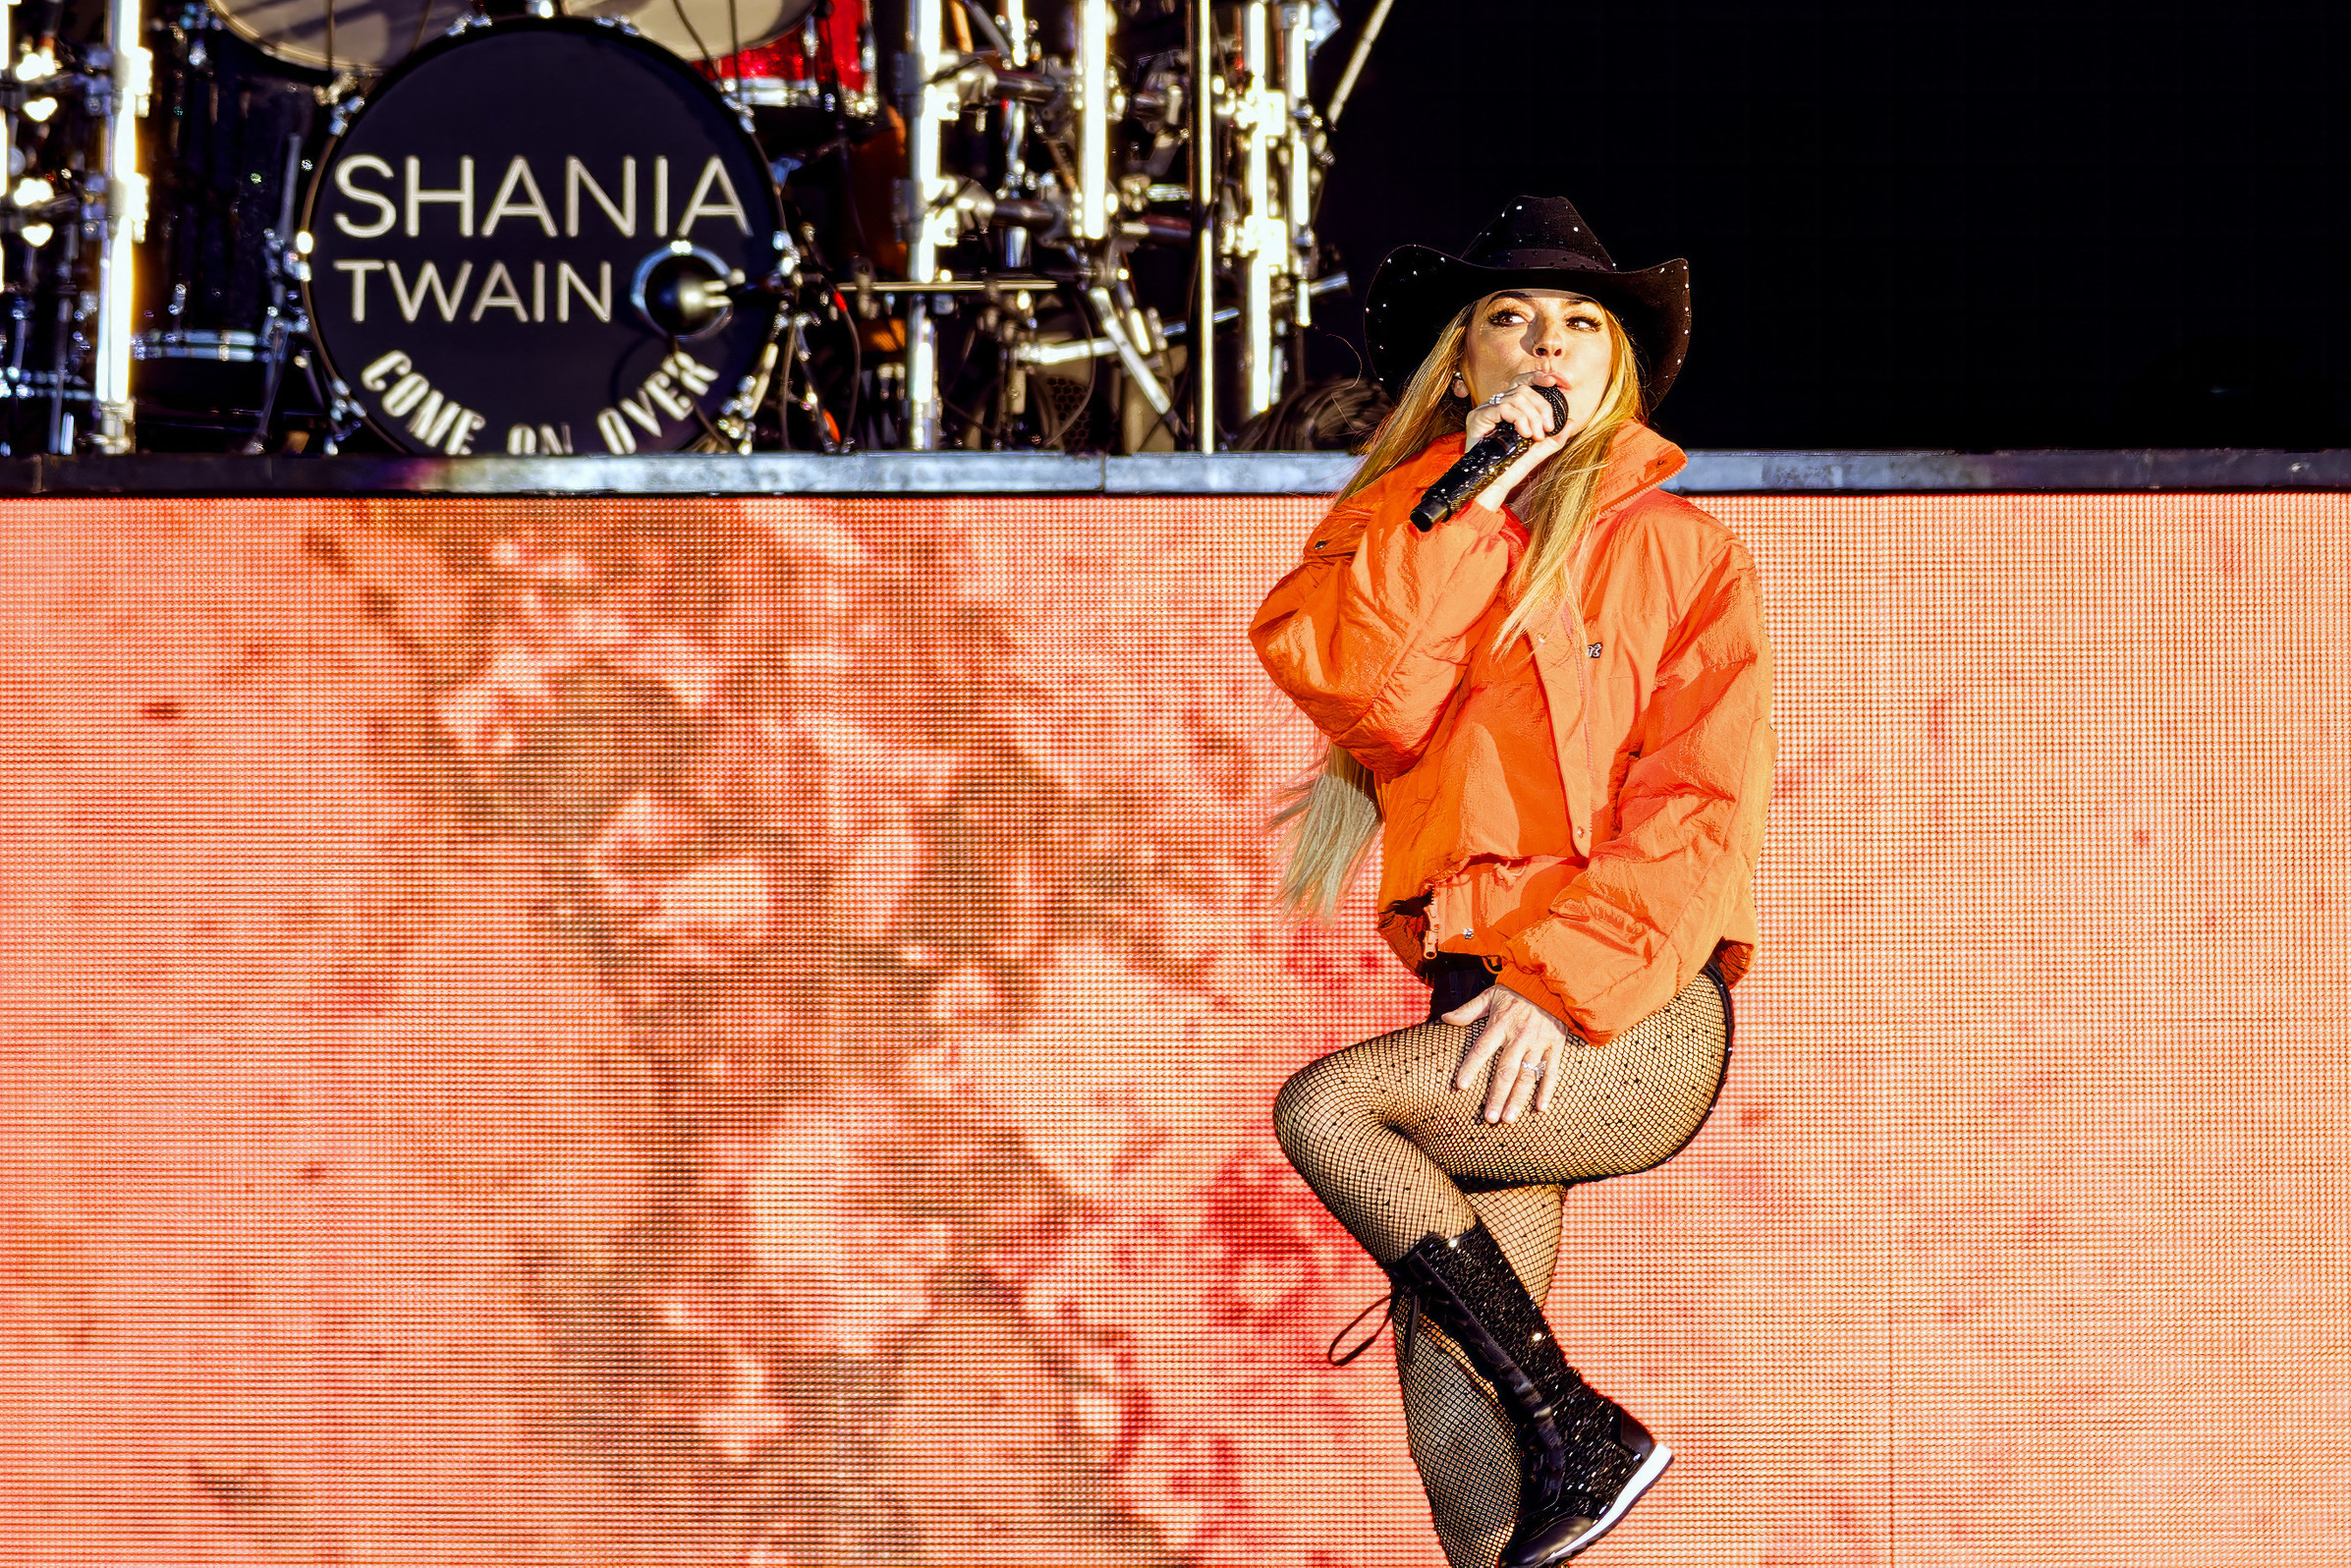 During her July 4 performance, the country singer wore a black leotard body suit, with fishnet stockings, black boots, a cowboy hat, and an orange puffer jacket